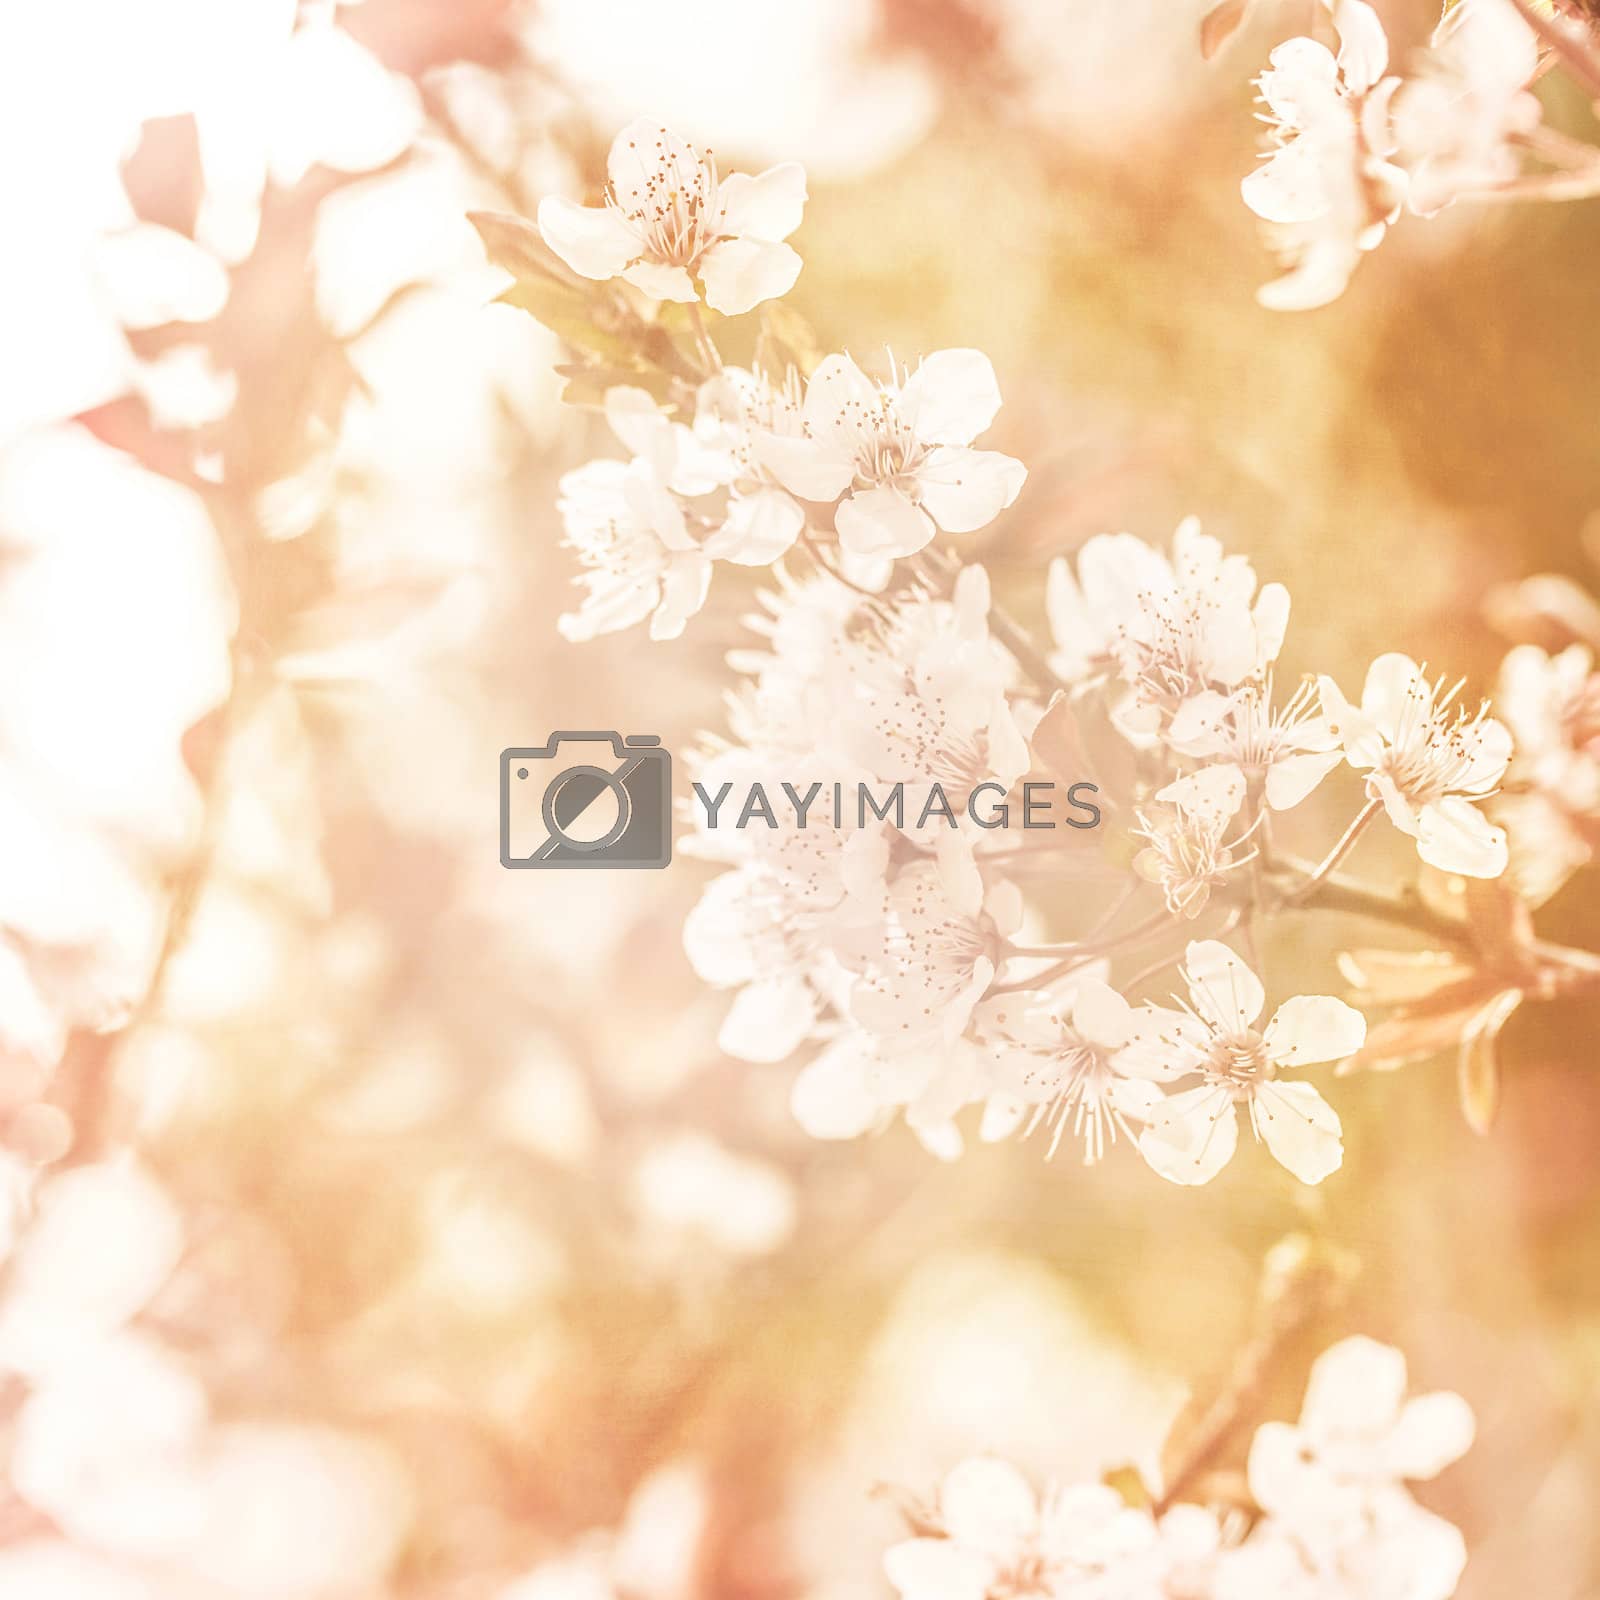 Royalty free image of Apple tree blossom by Anna_Omelchenko